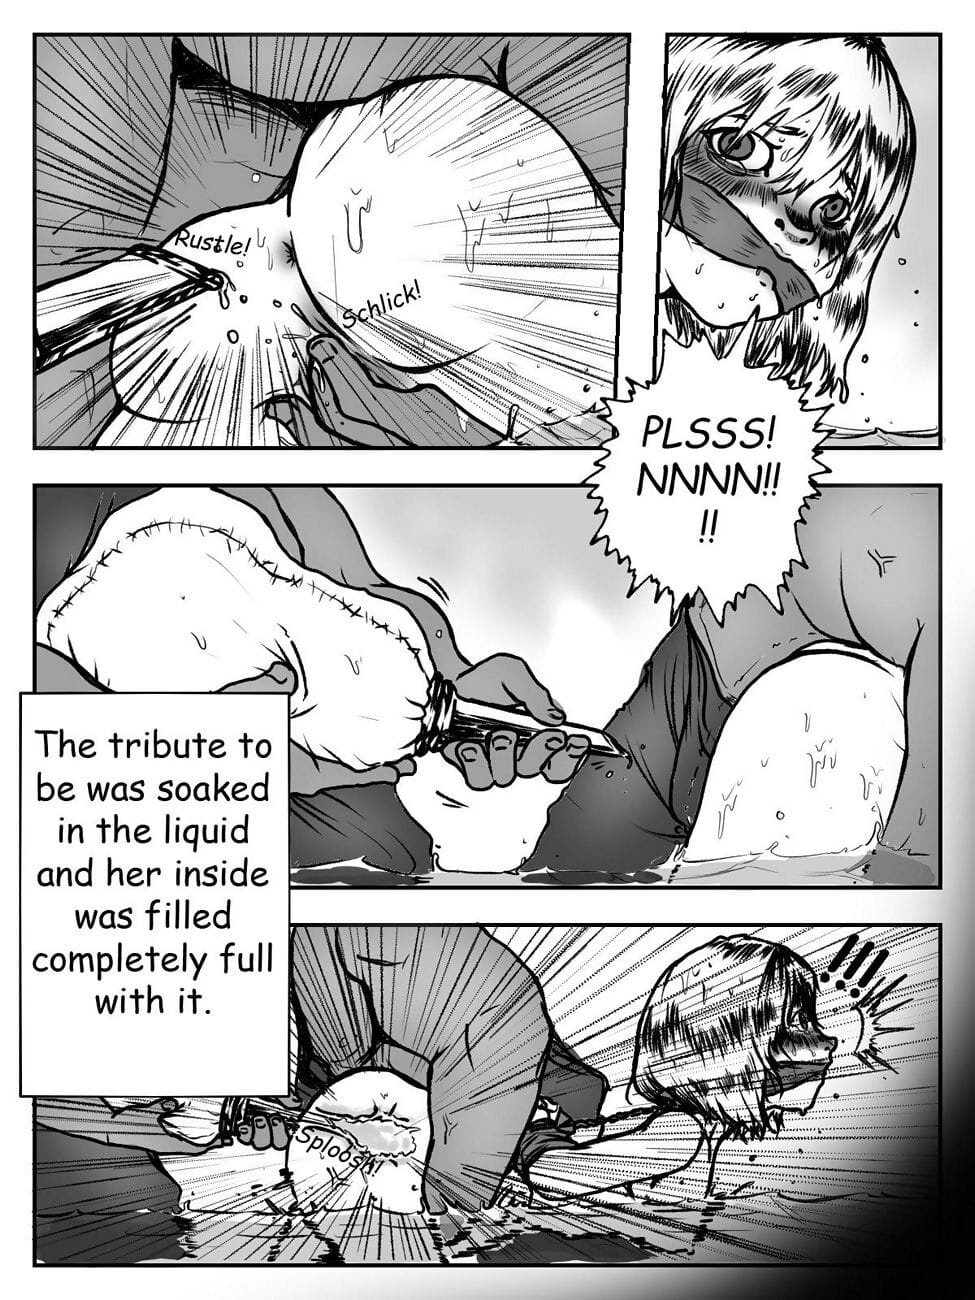 Drooling Tribute - Kingmaker - part 2 page 1